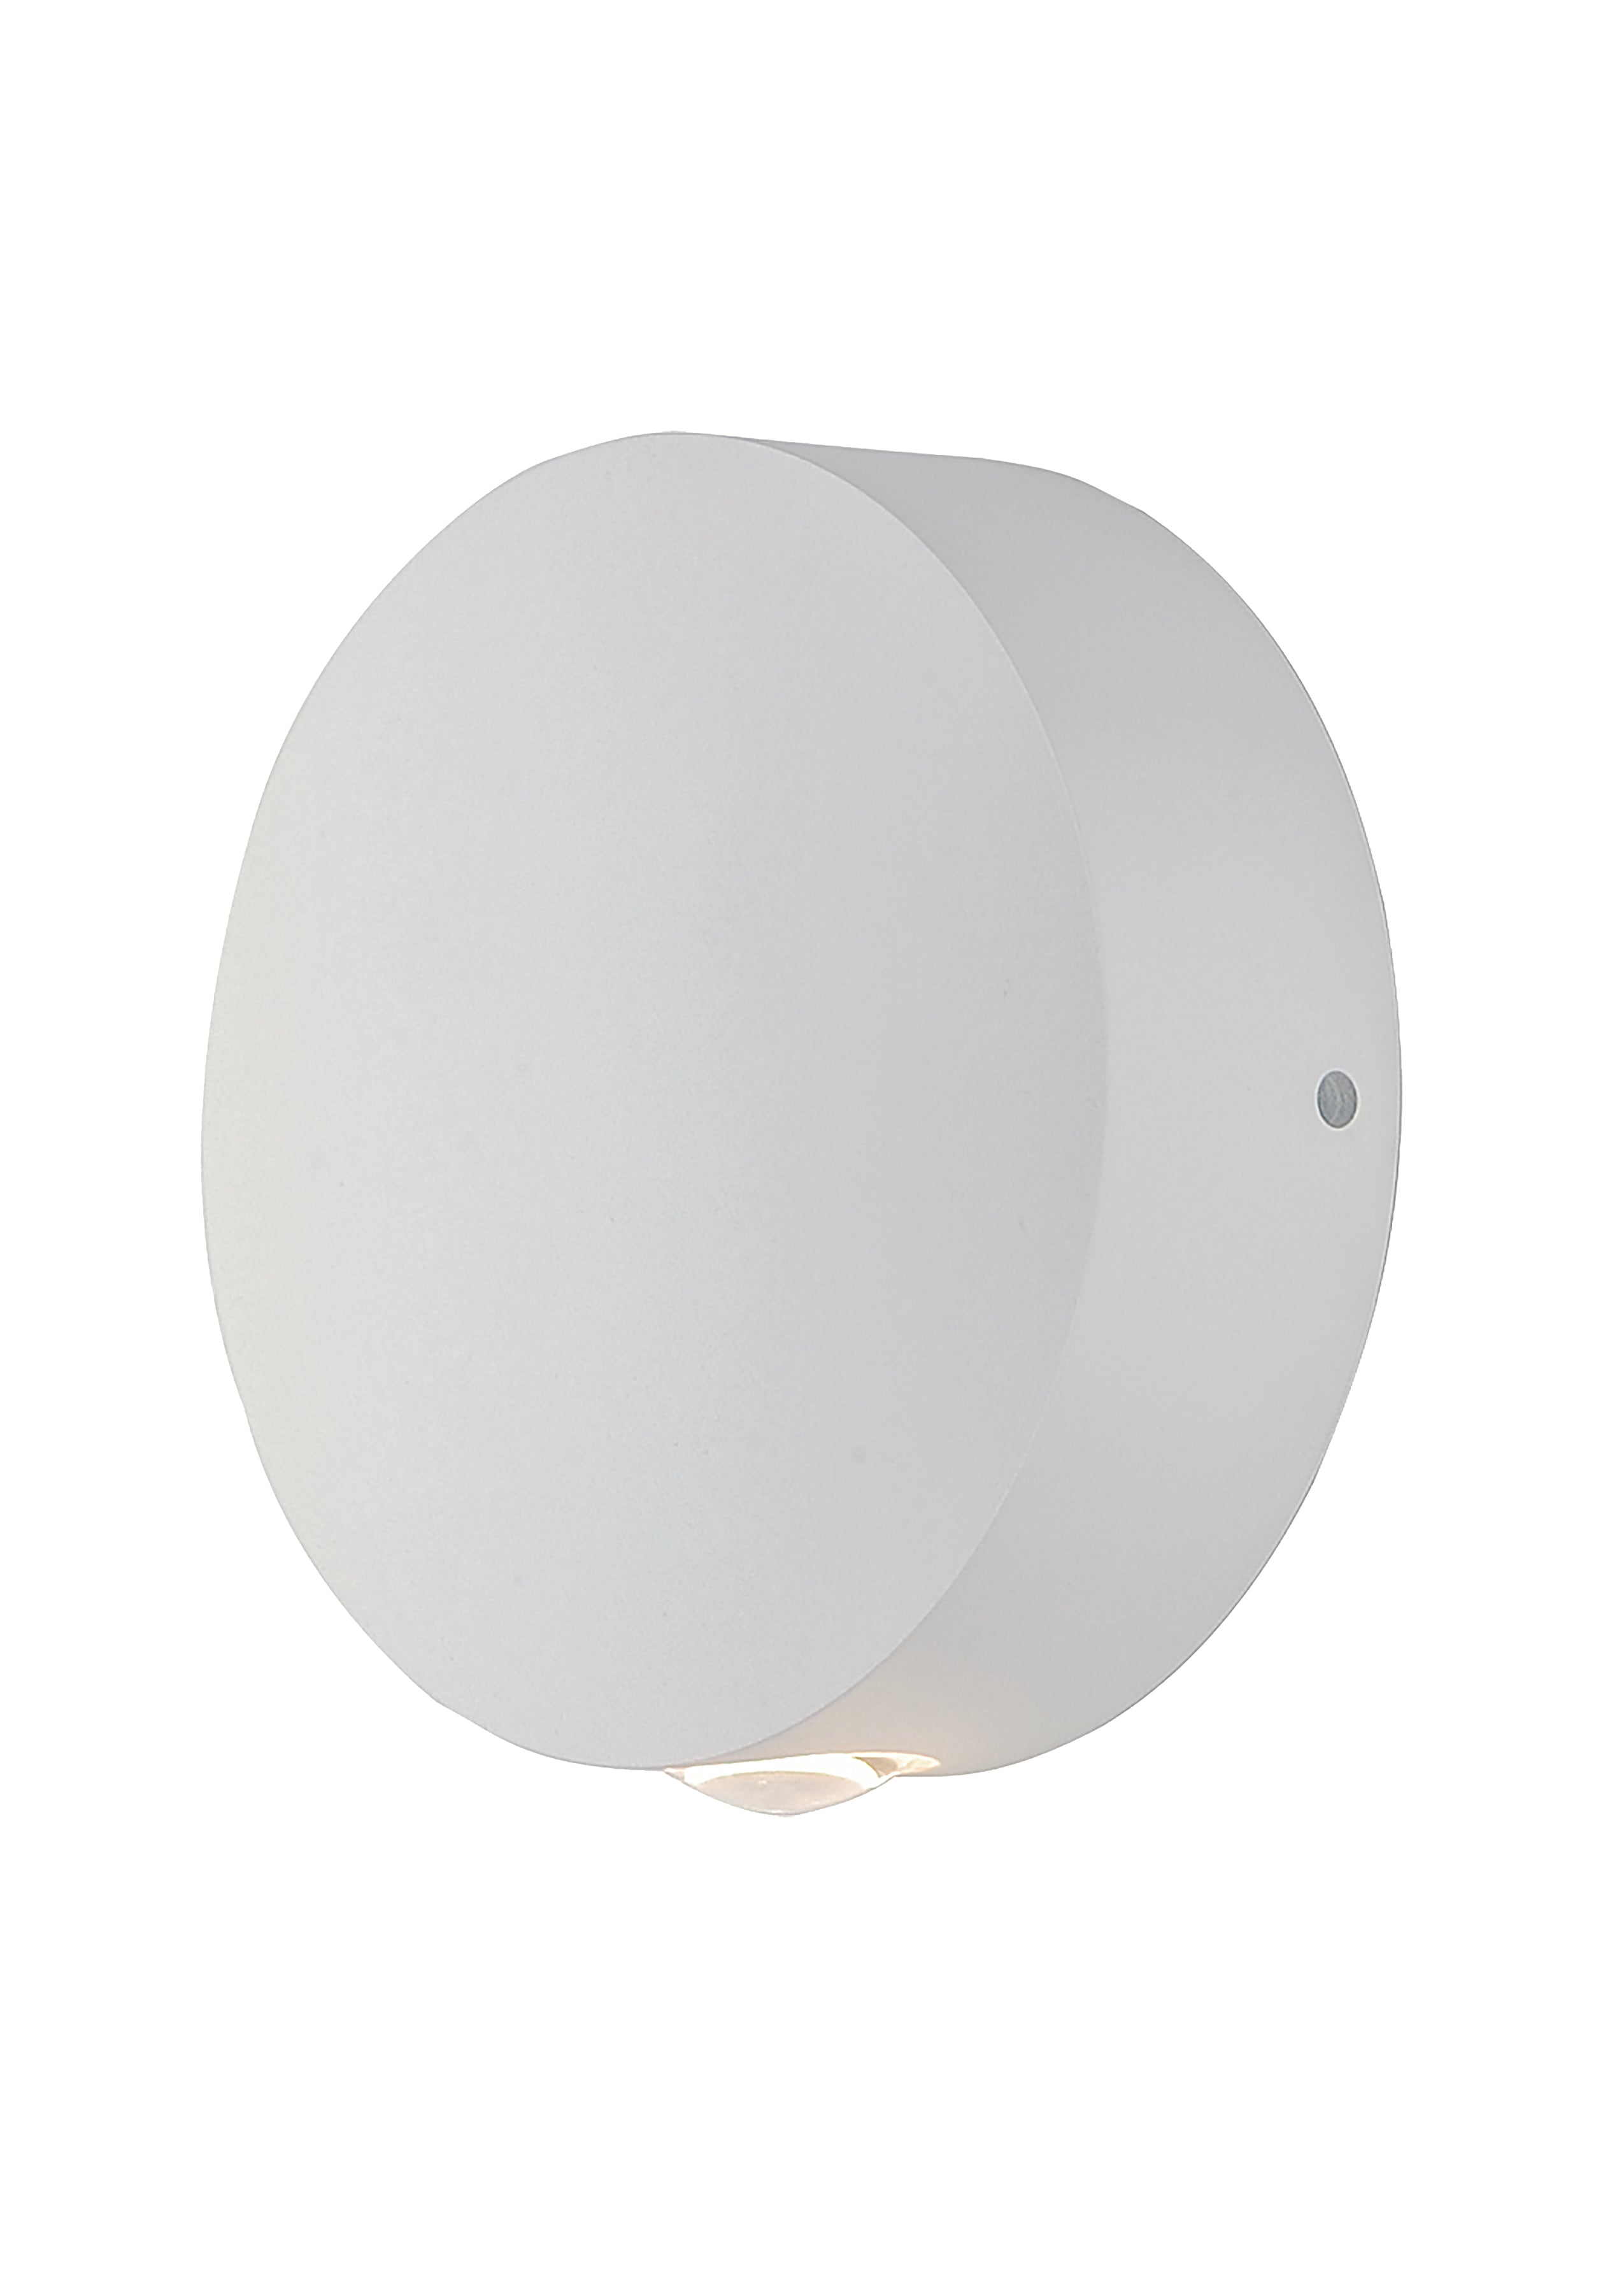 Alumilux Glint-Outdoor Wall Mount Outdoor l Wall ET2 0x4.75x5 White 